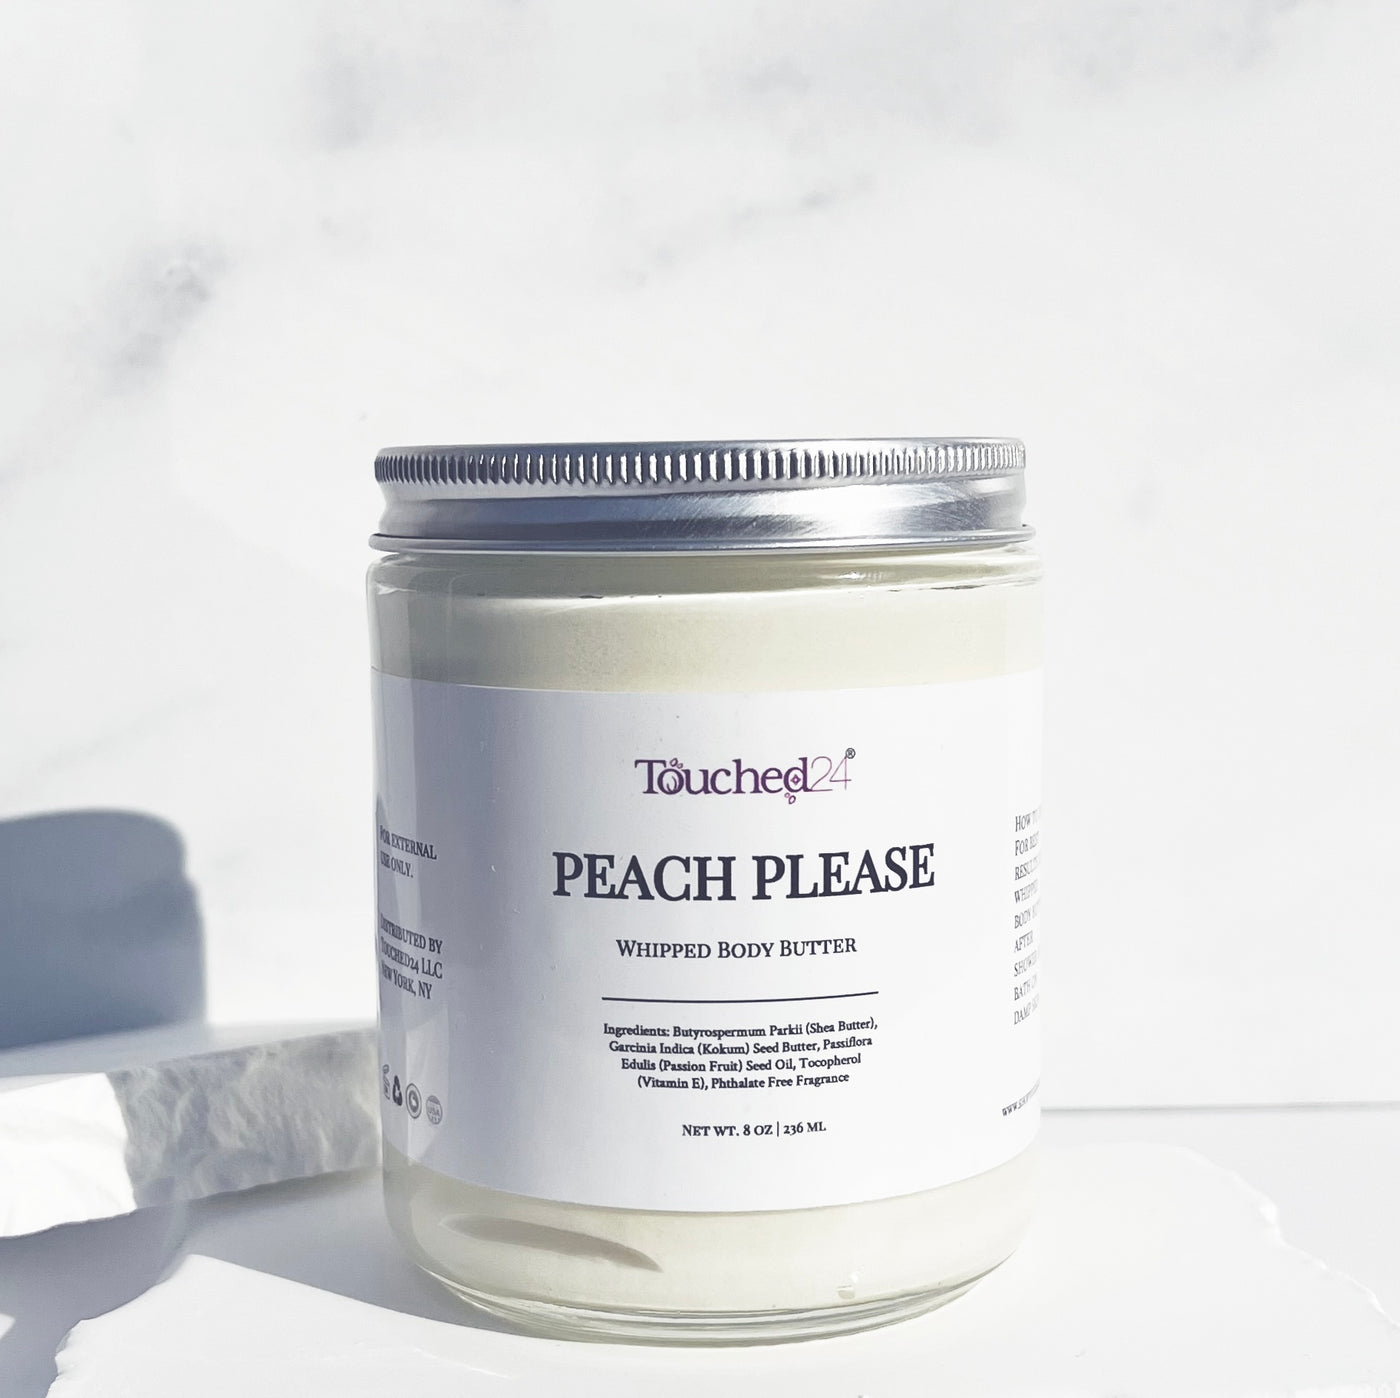 Peach Please Whipped Body Butter